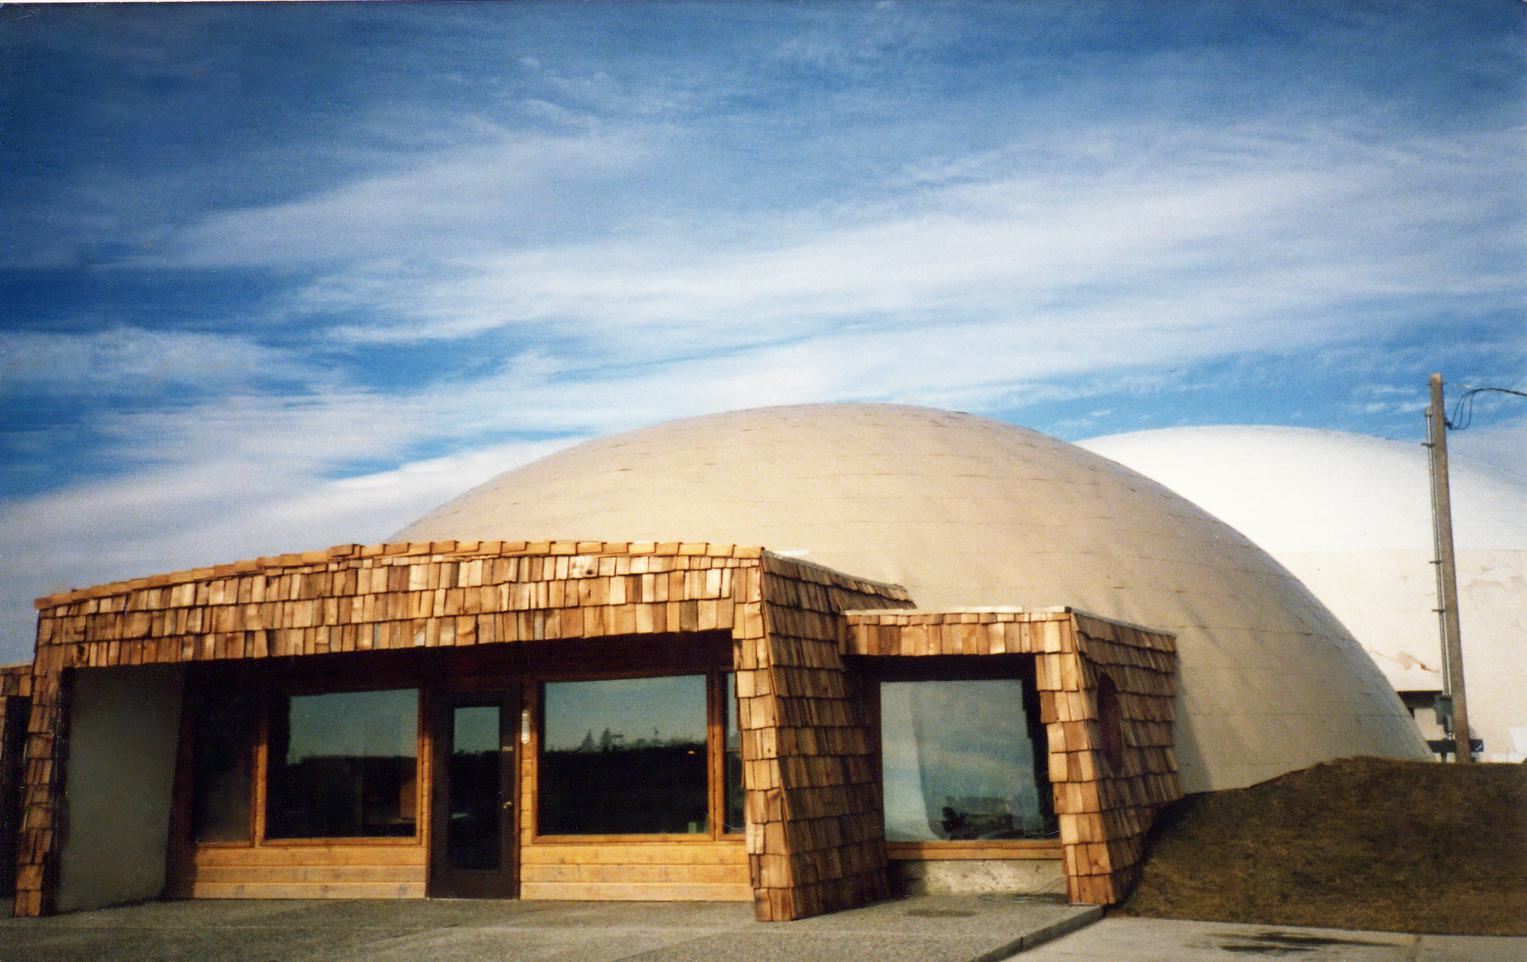 Monolithic's first Monolithic dome office building and shop in Idaho Falls, Idaho.